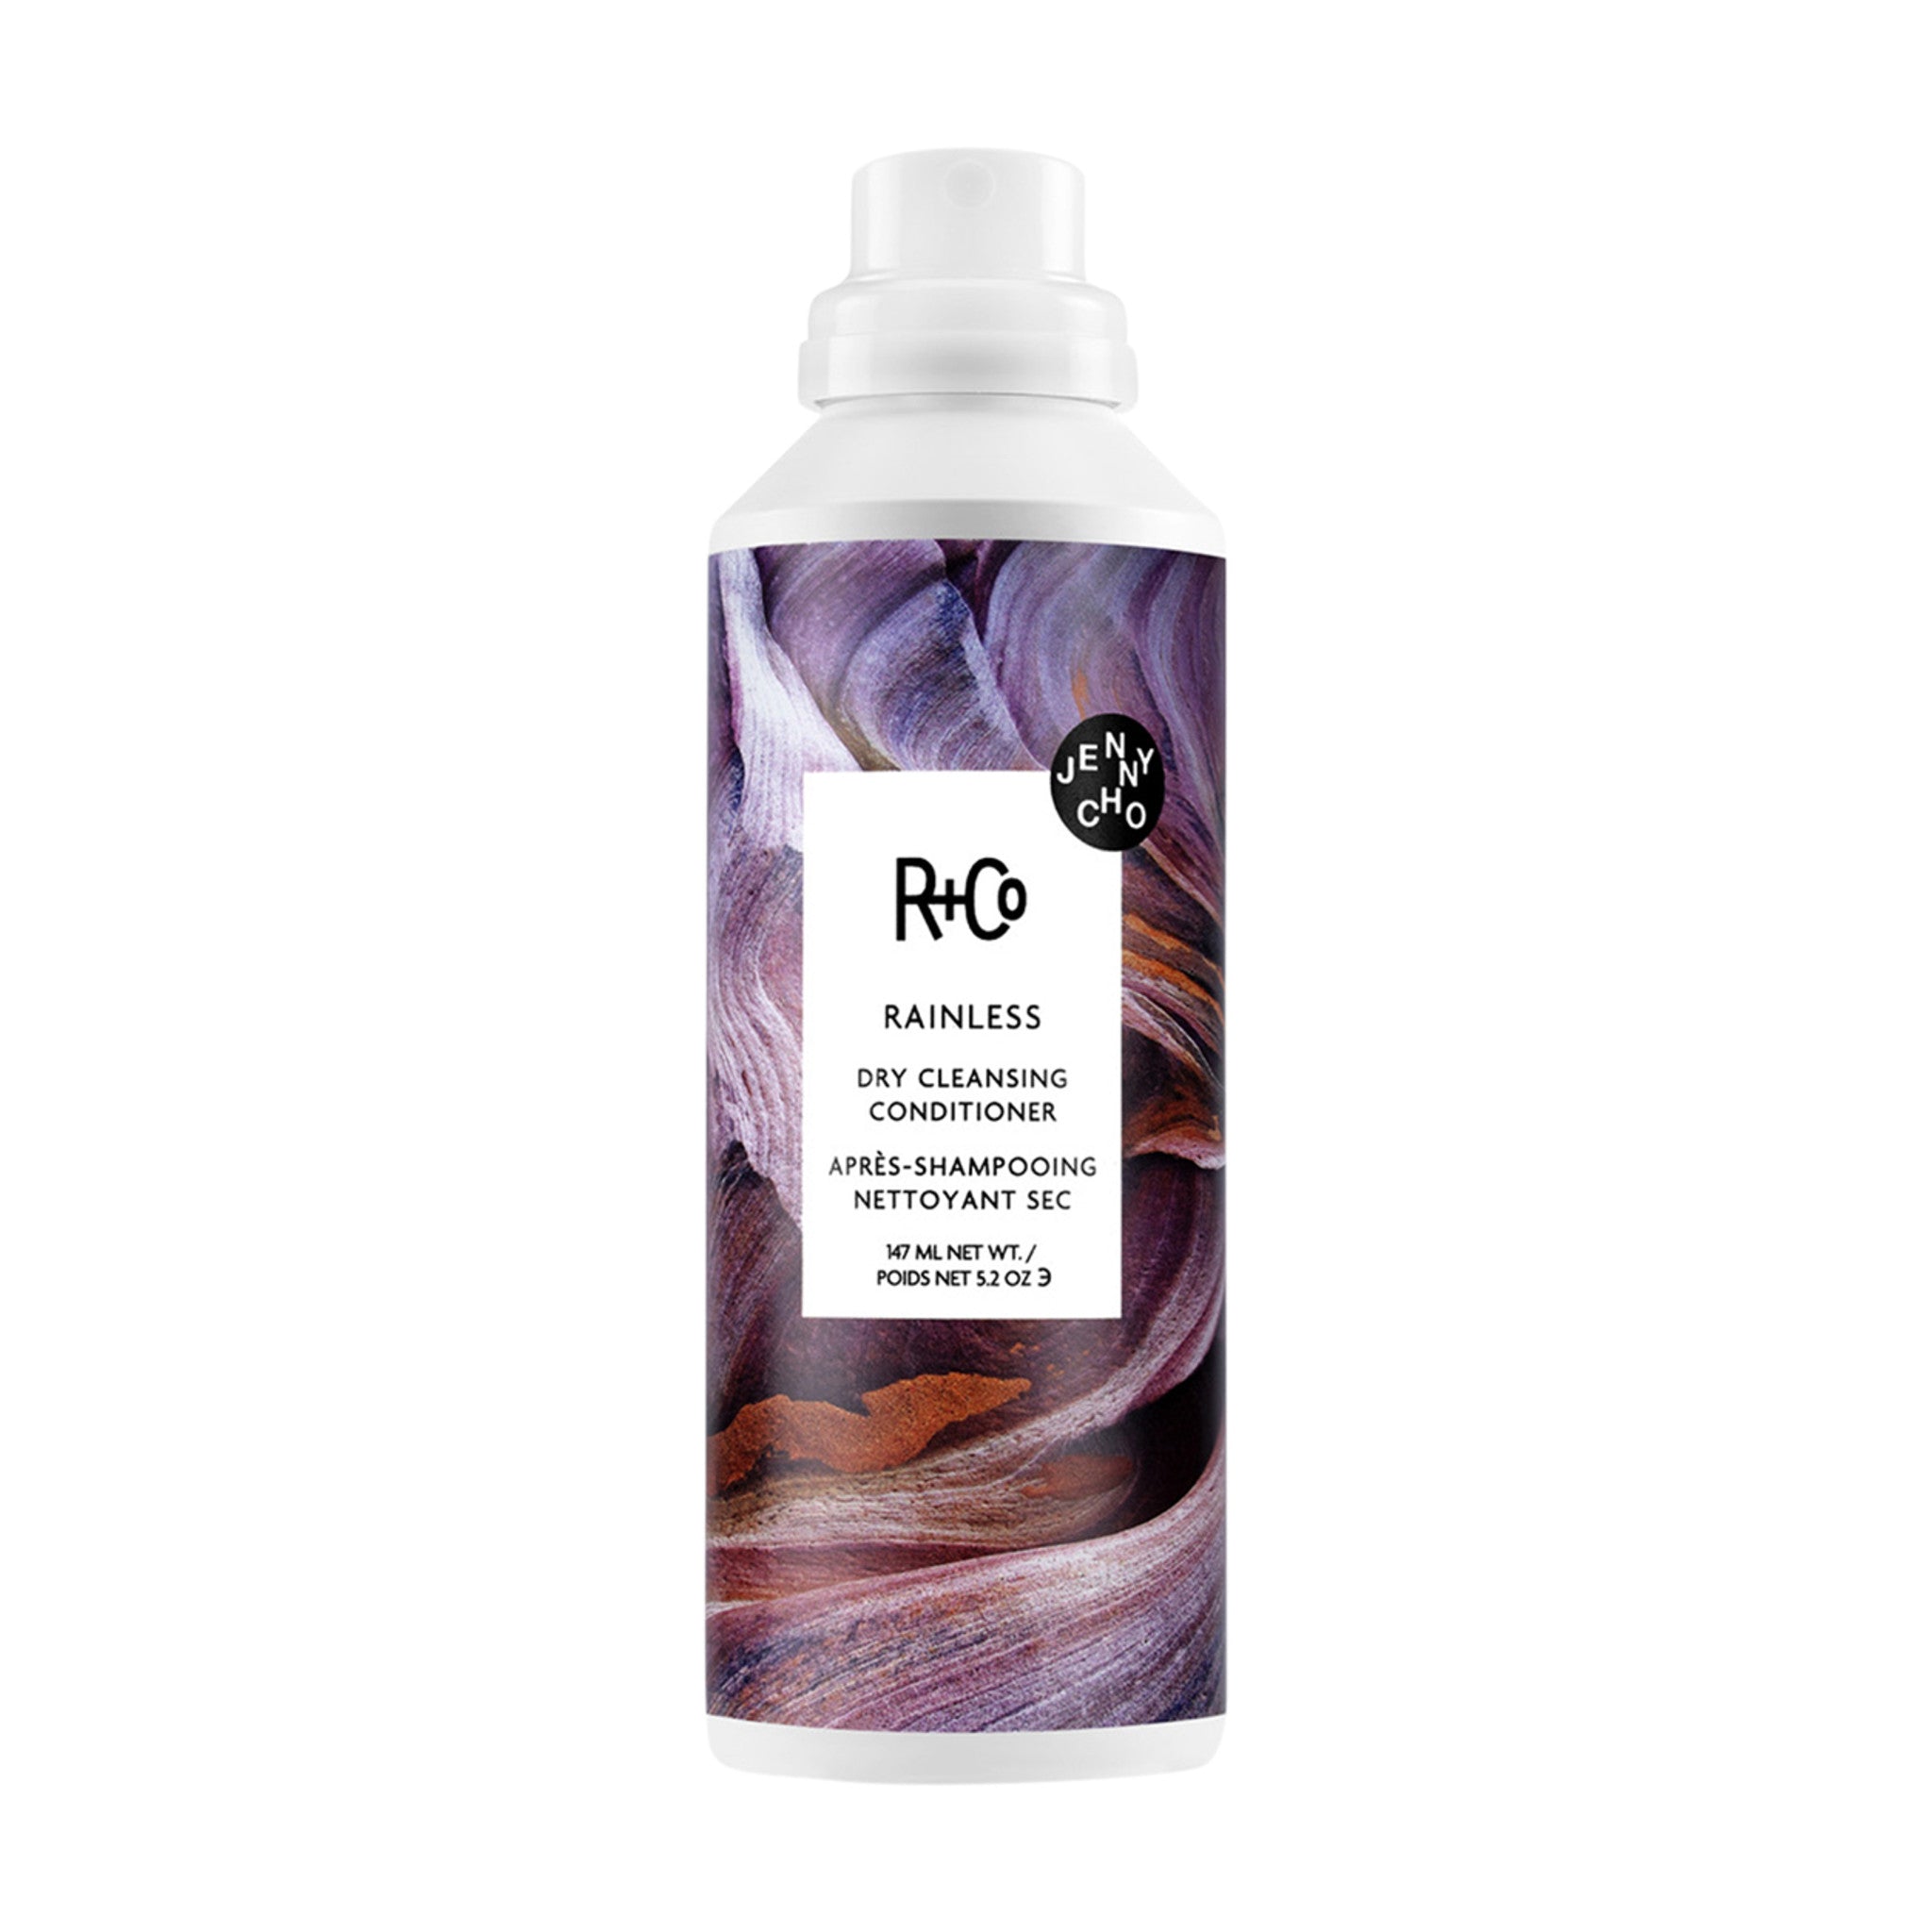 R+Co Rainless Dry Cleansing Conditioner main image.